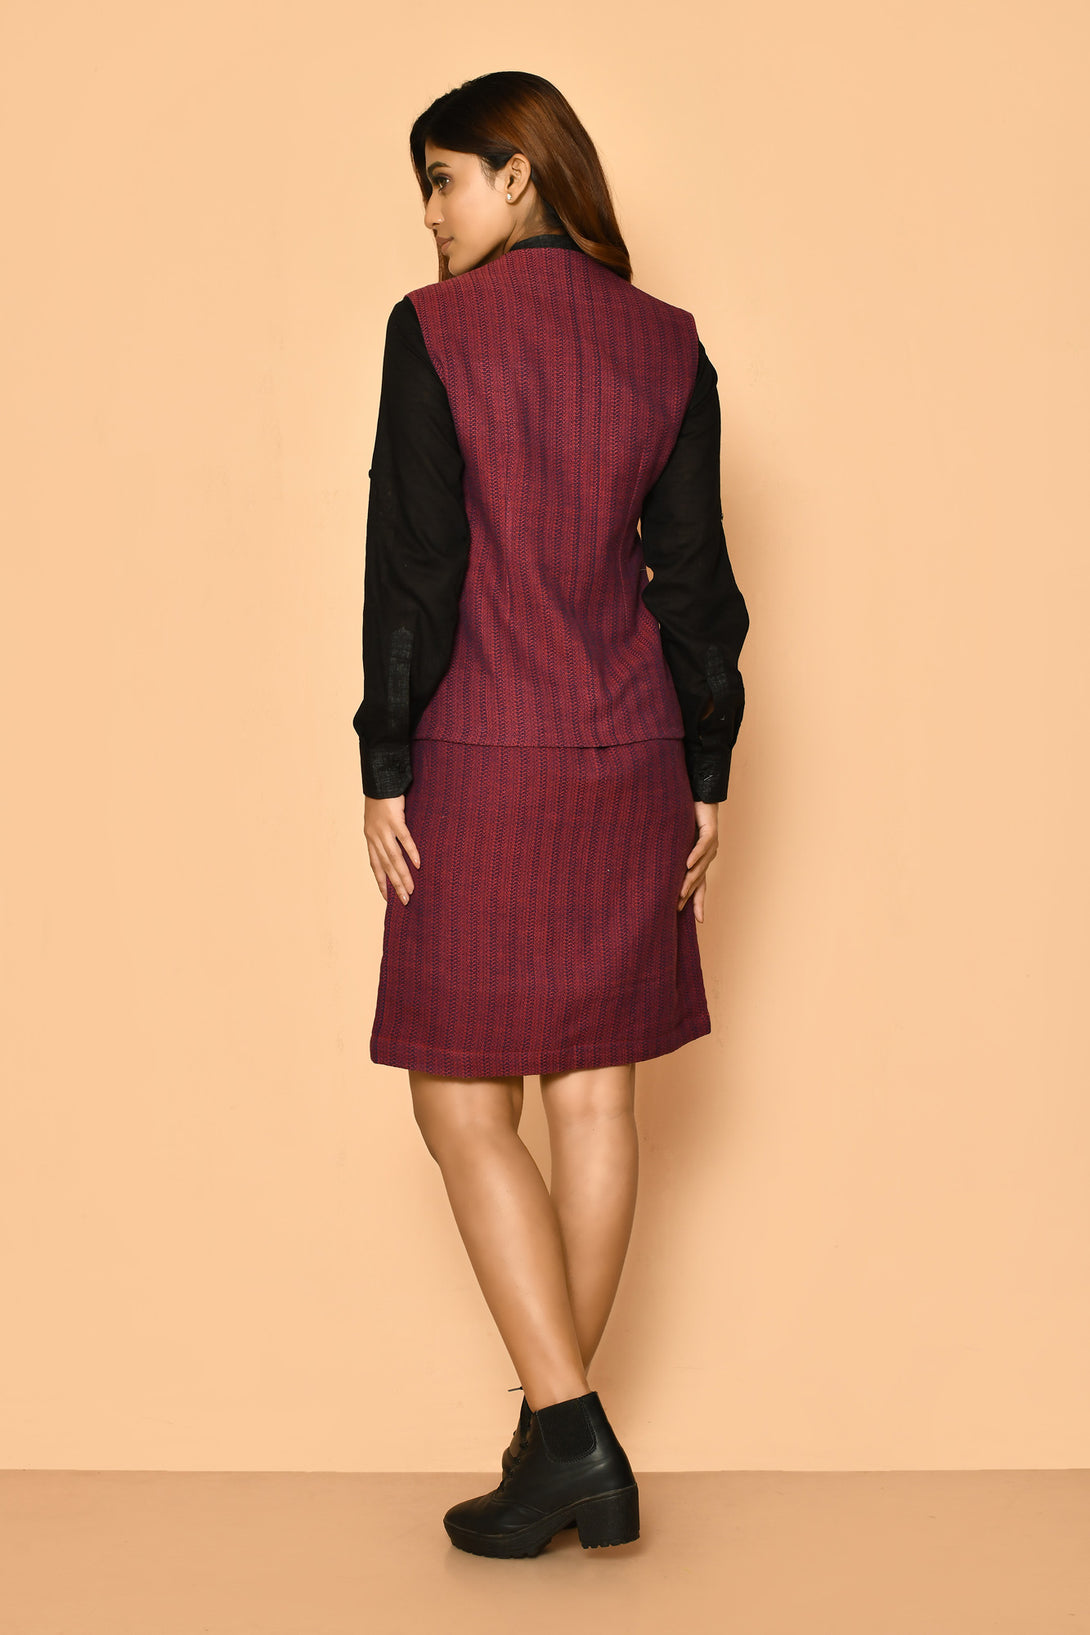 Women's skirt two piece co-ord set is the perfect addition to your work wear wardrobe